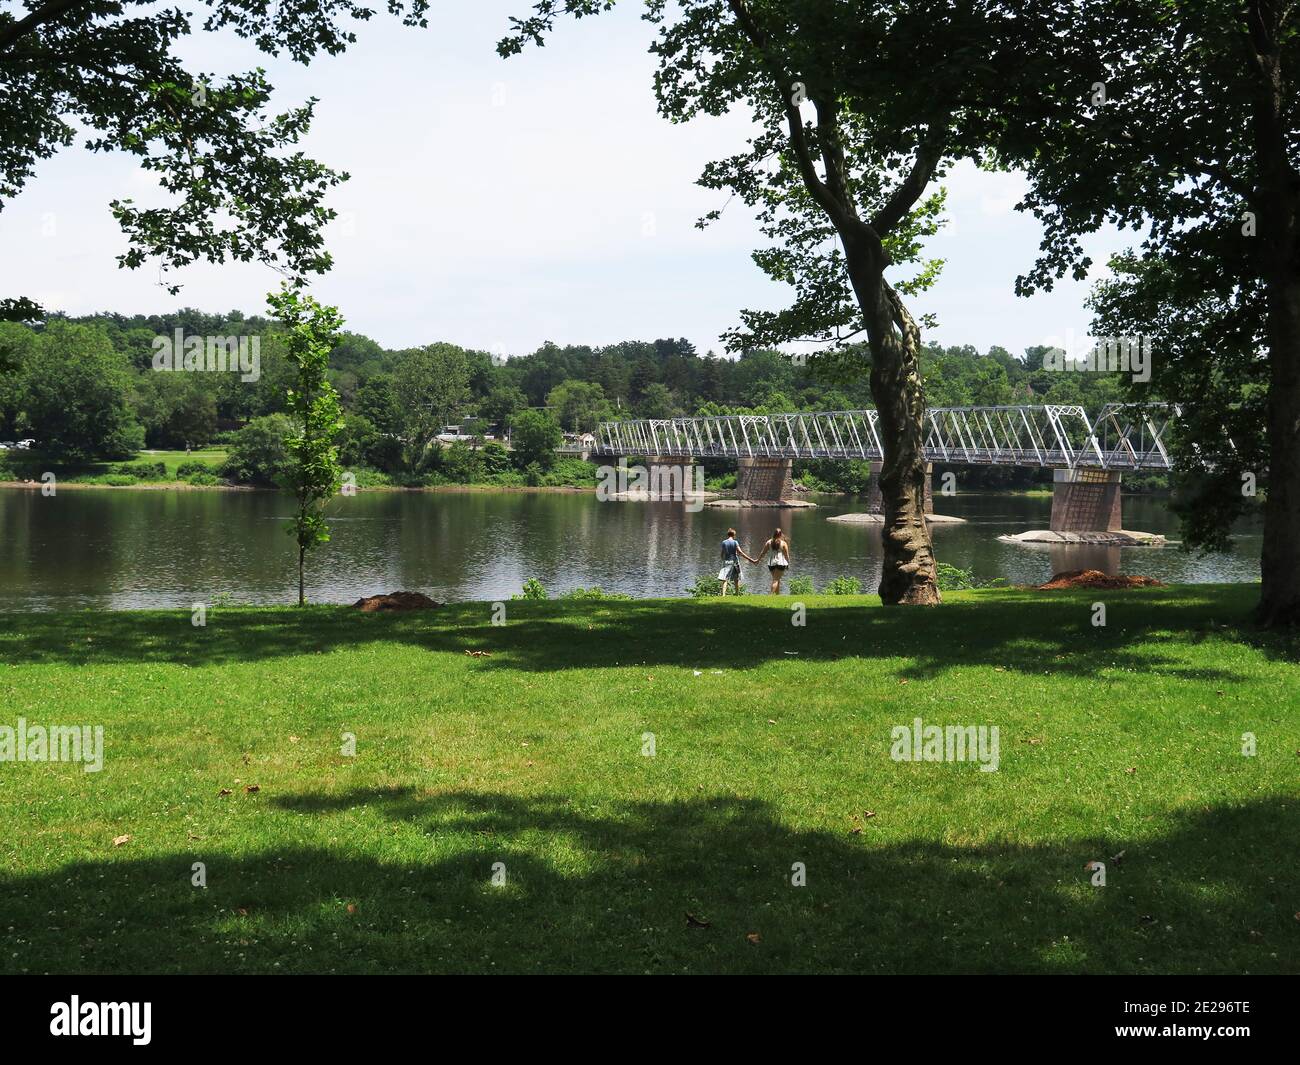 Washington's Crossing, Delaware, National Historic Site, State Park, Stock Photo